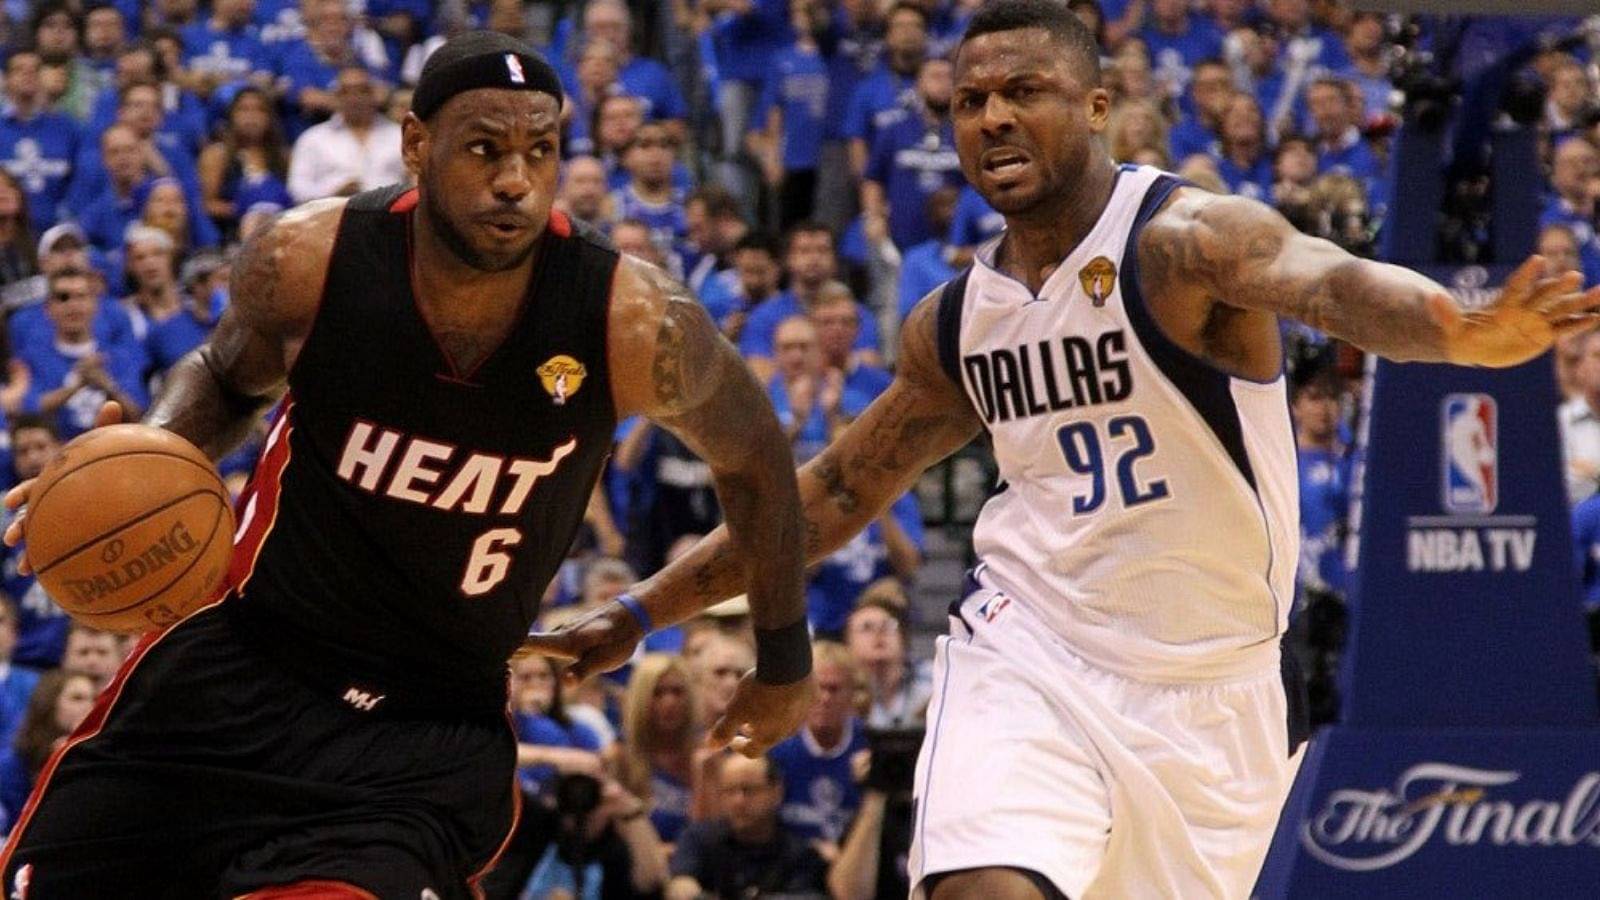 “Told LeBron James I'll slap the sh-t outta him at tipoff”: DeShawn Stevenson, one of the Mavericks heroes from 2011 Finals